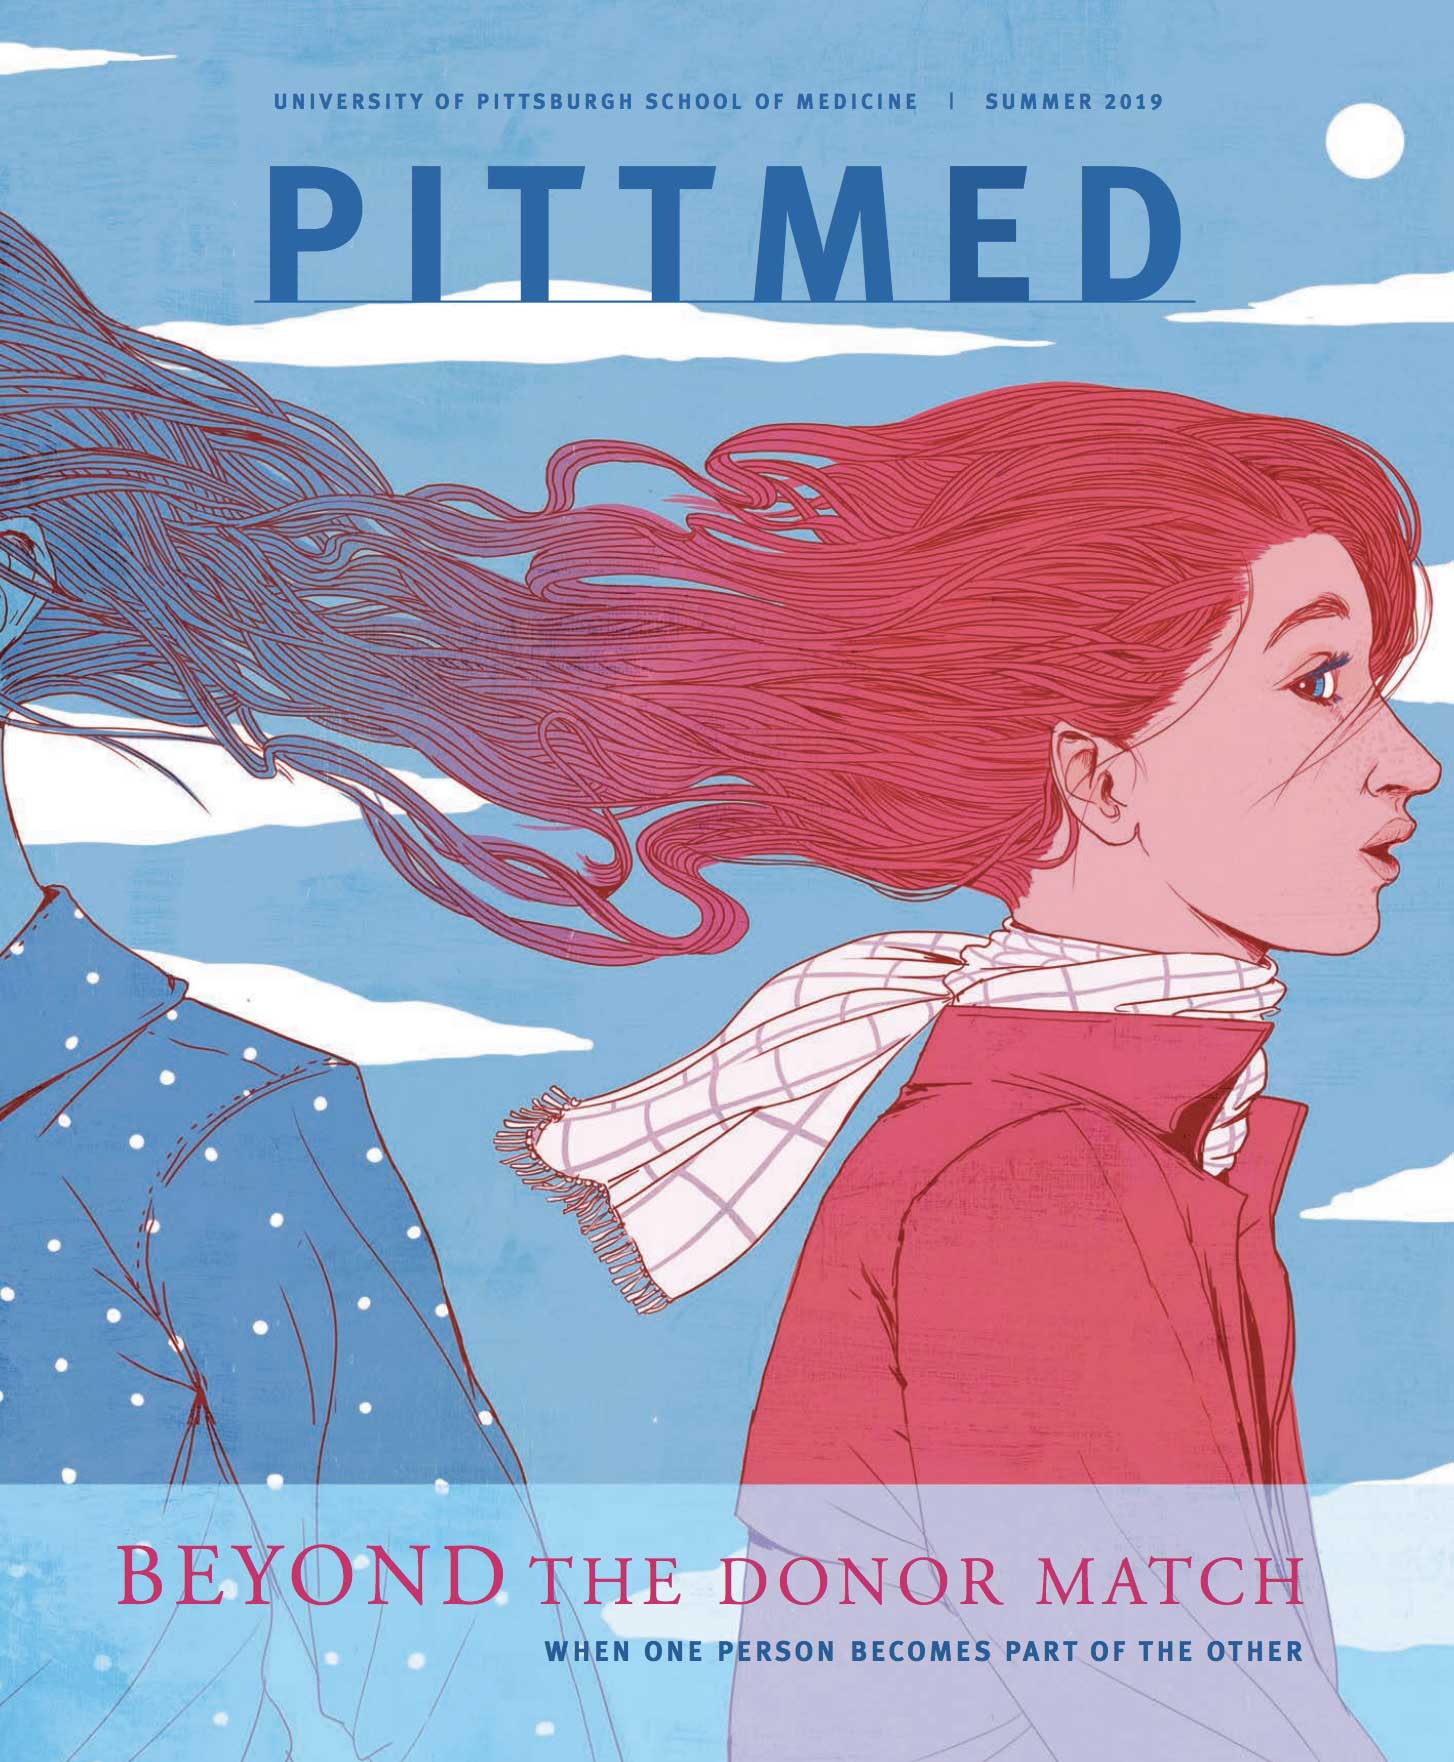 the cover of Pitt Med magazine, which has a blue and red illustration of two women's hair intertwining